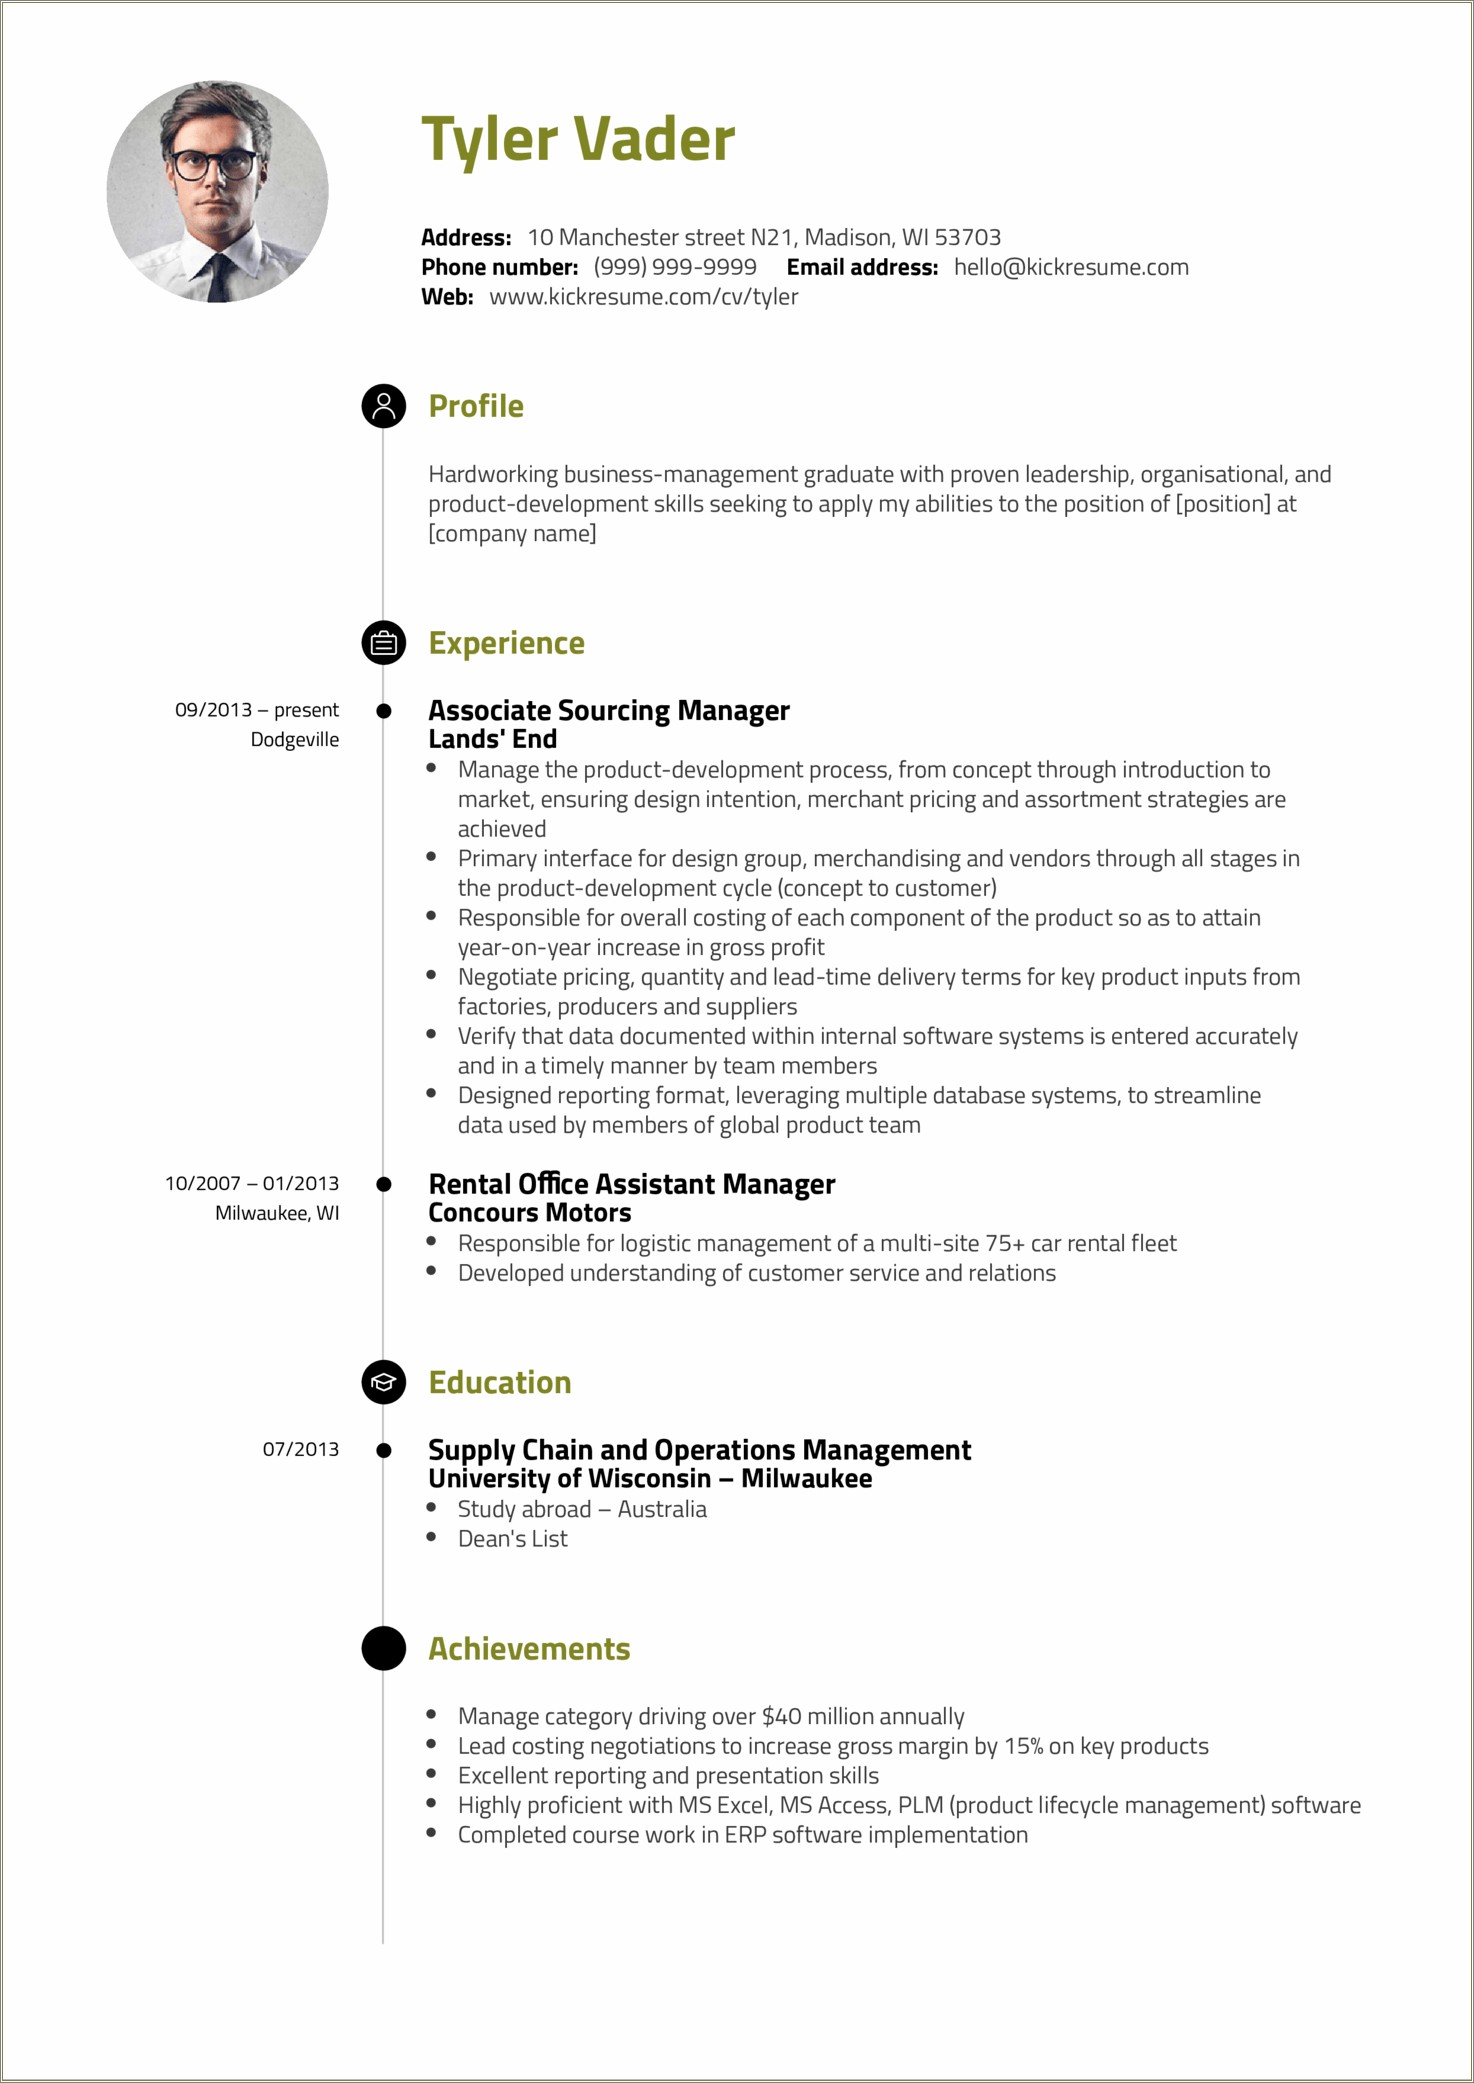 Resume Objective For Healthcare Management Position